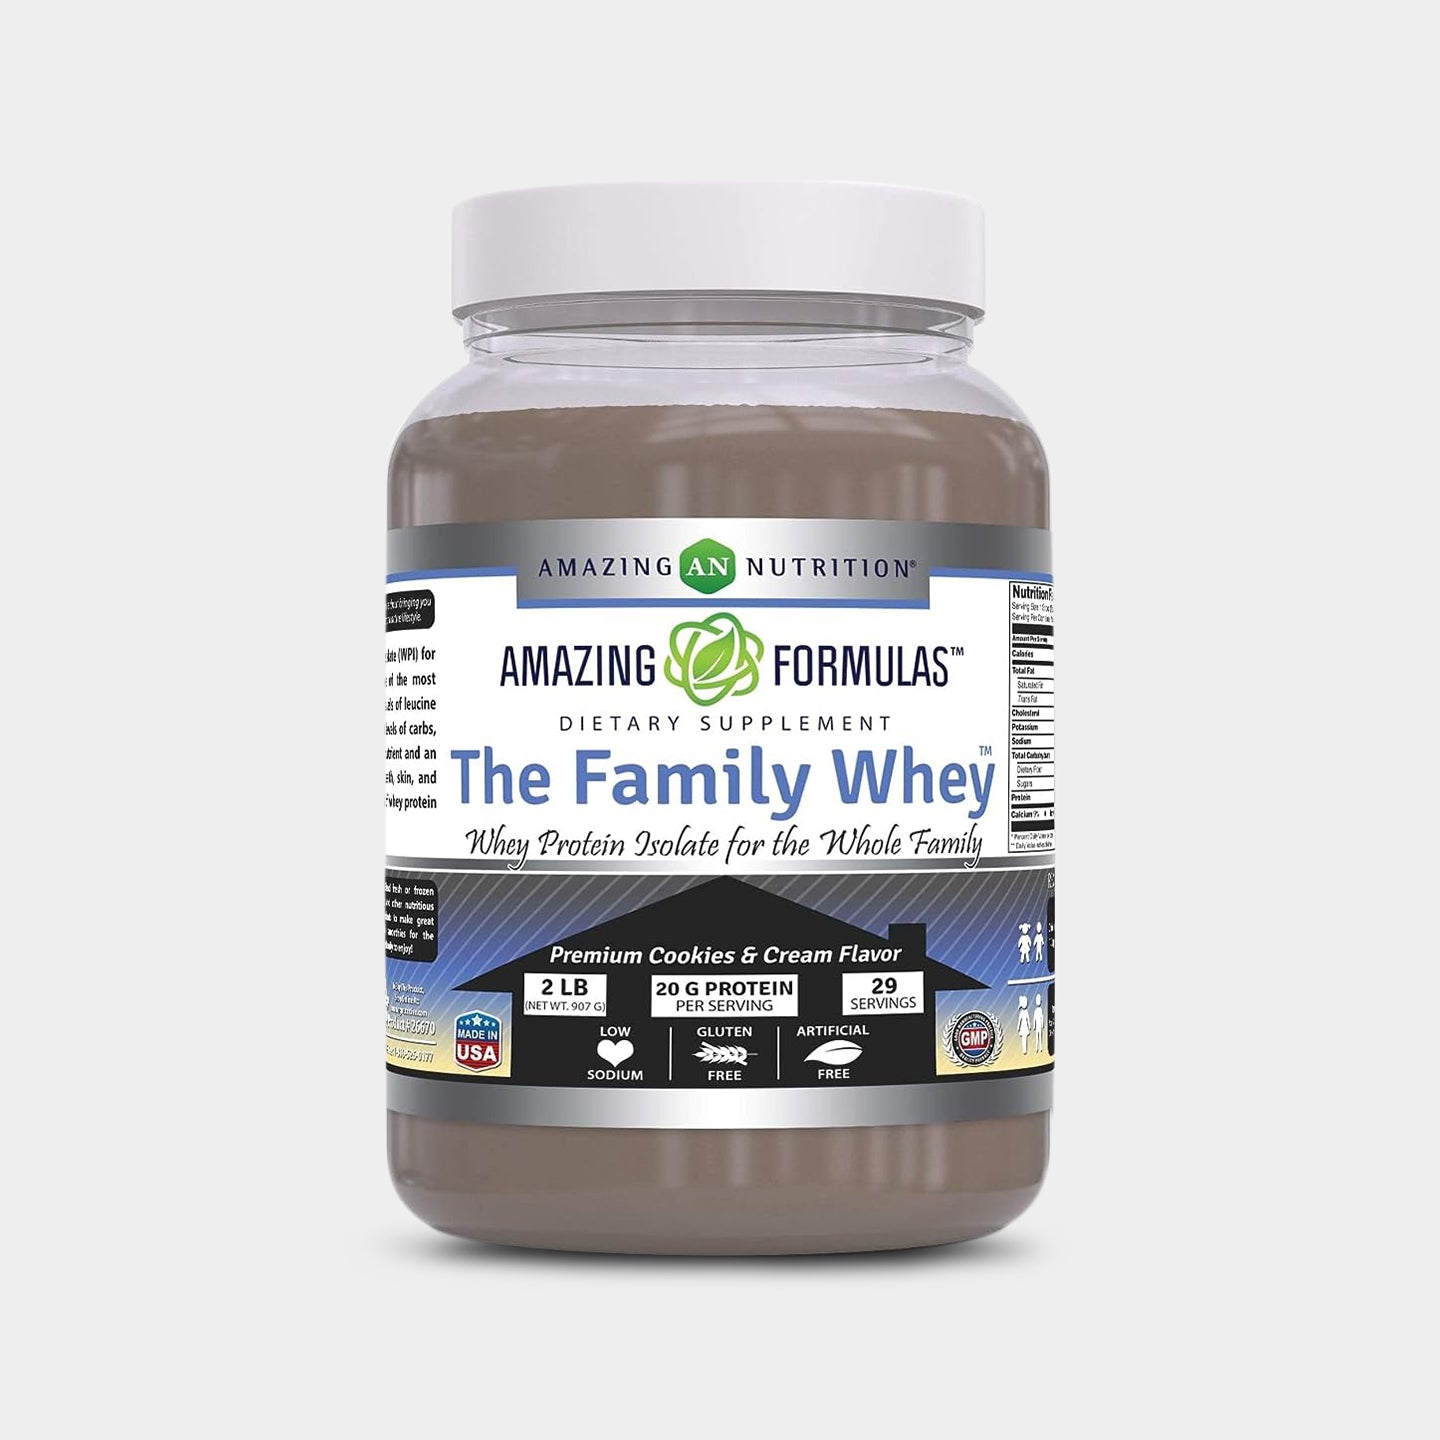 Amazing Formulas The Family Whey - Whey Protein Isolate A1